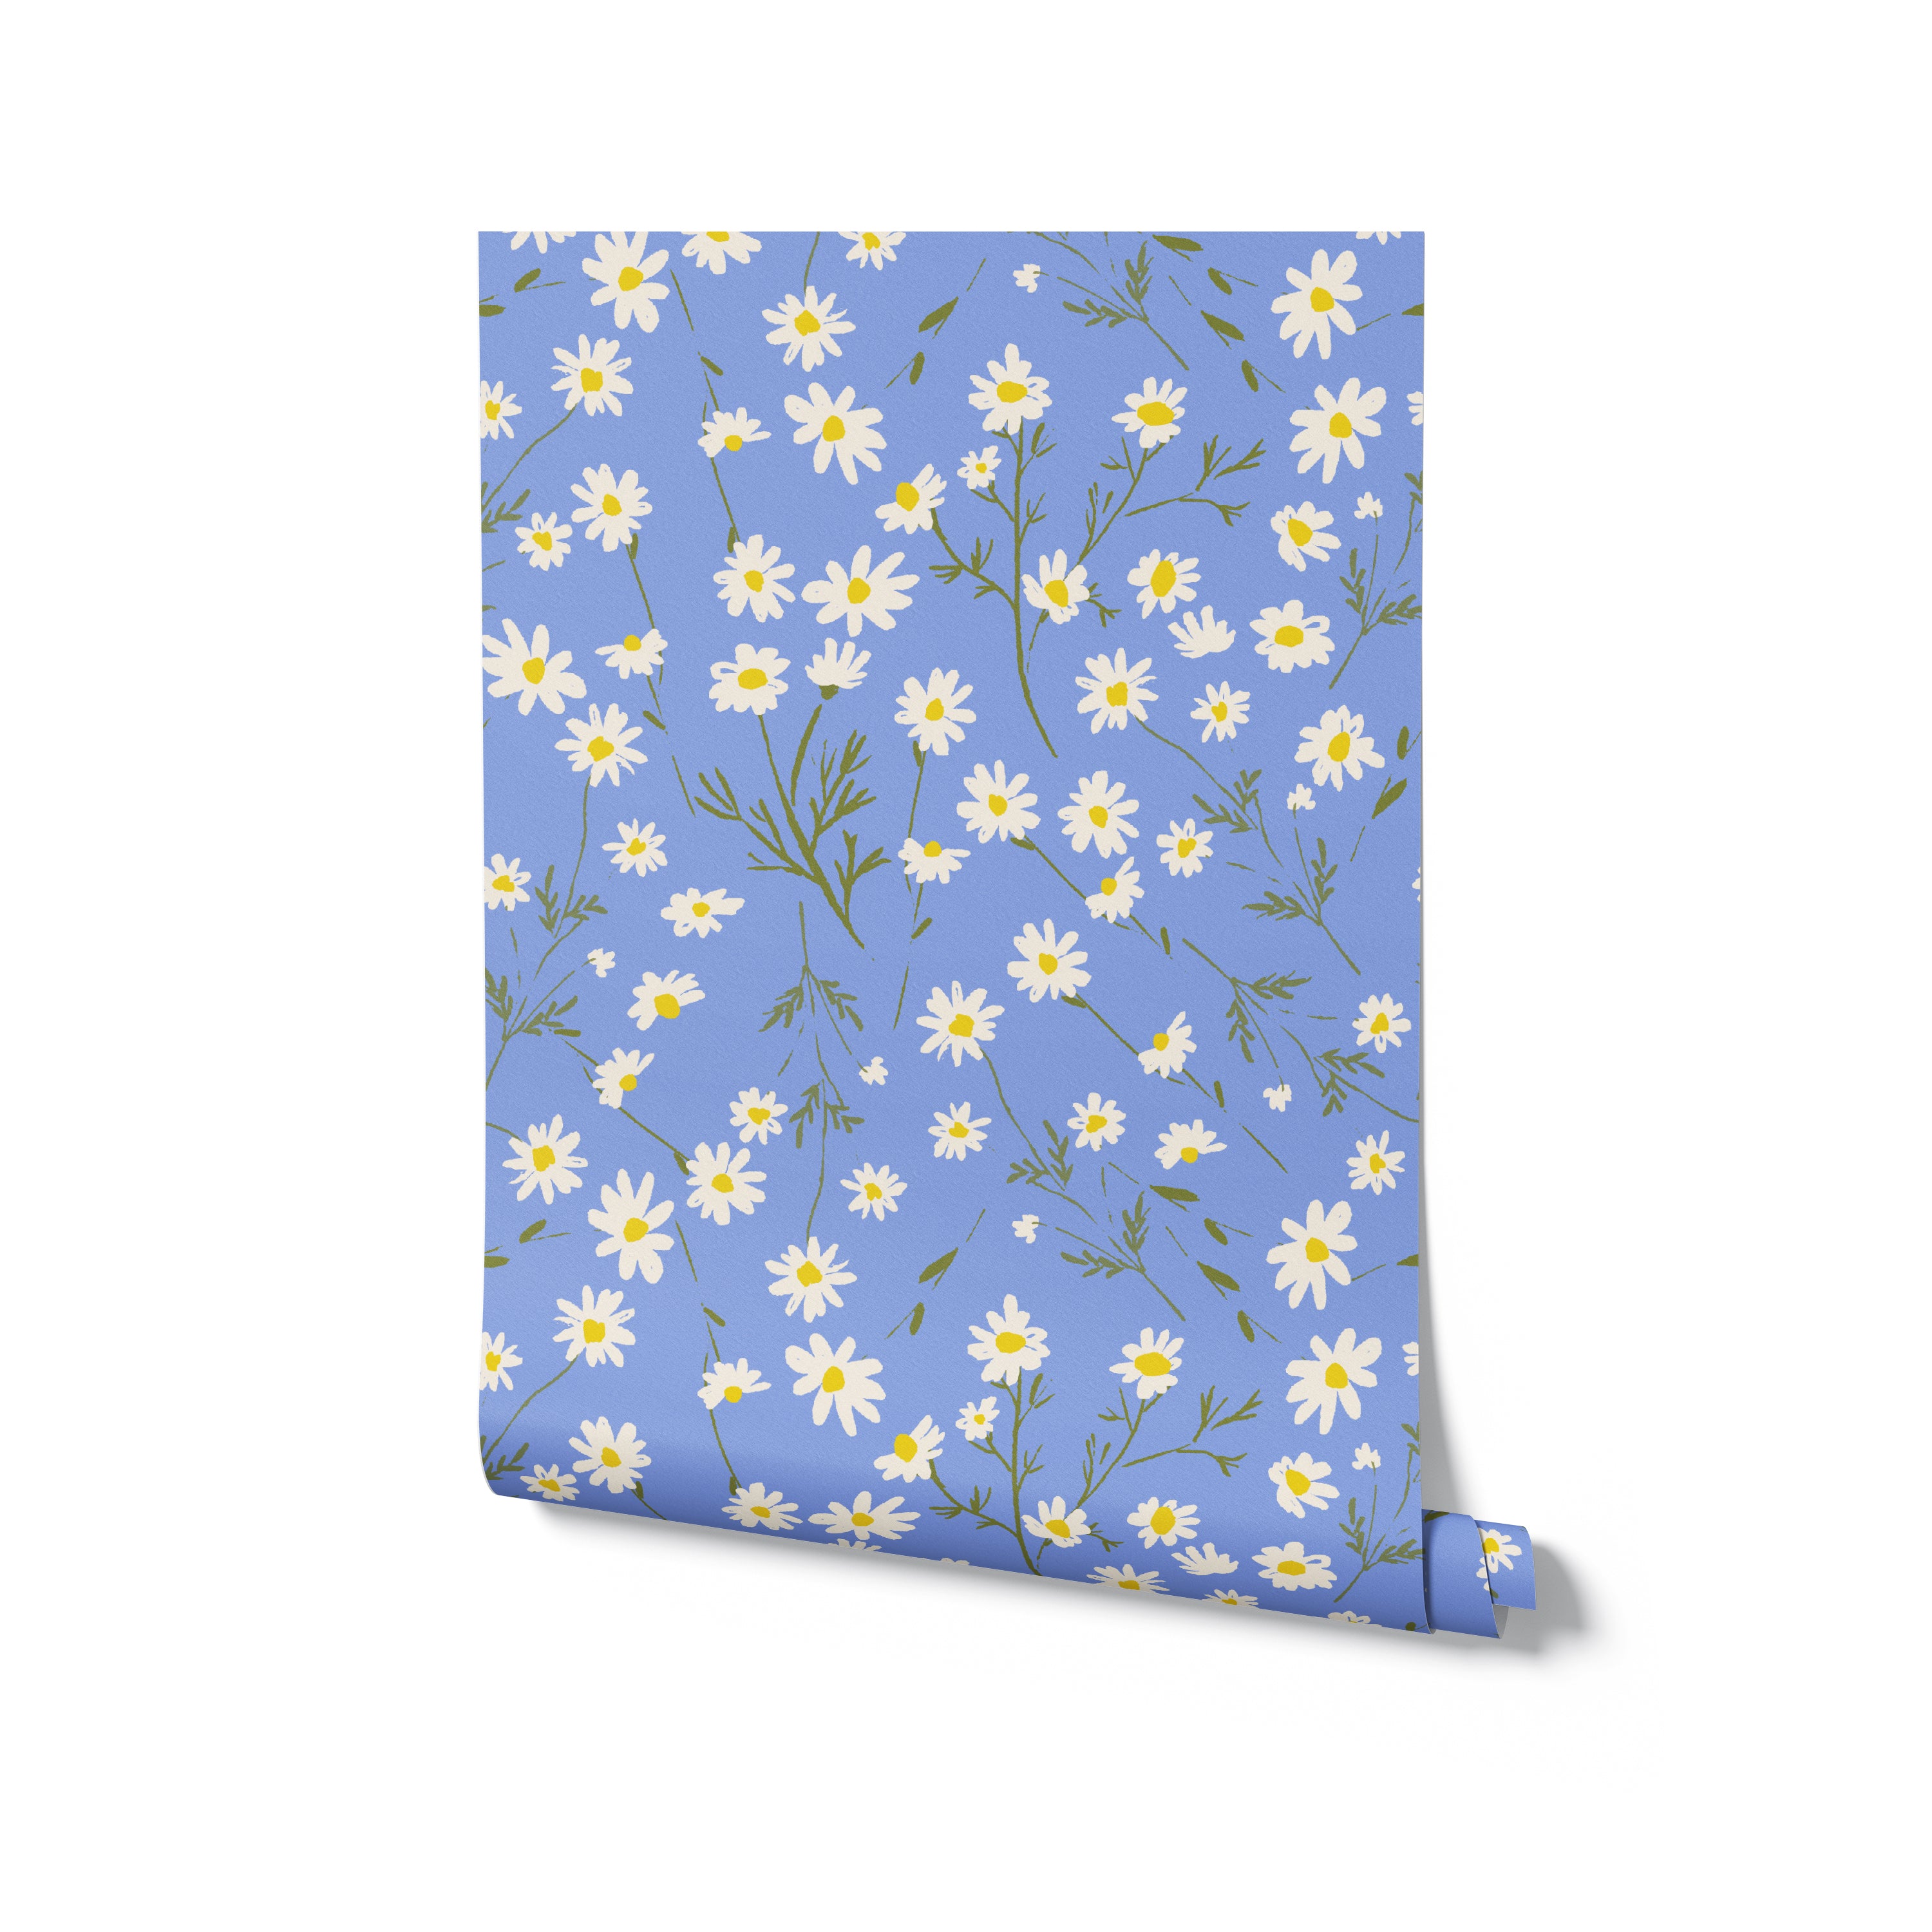 A roll of light blue wallpaper featuring a pattern of white and yellow daisies with green stems and leaves, symbolizing a fresh and lively floral design.